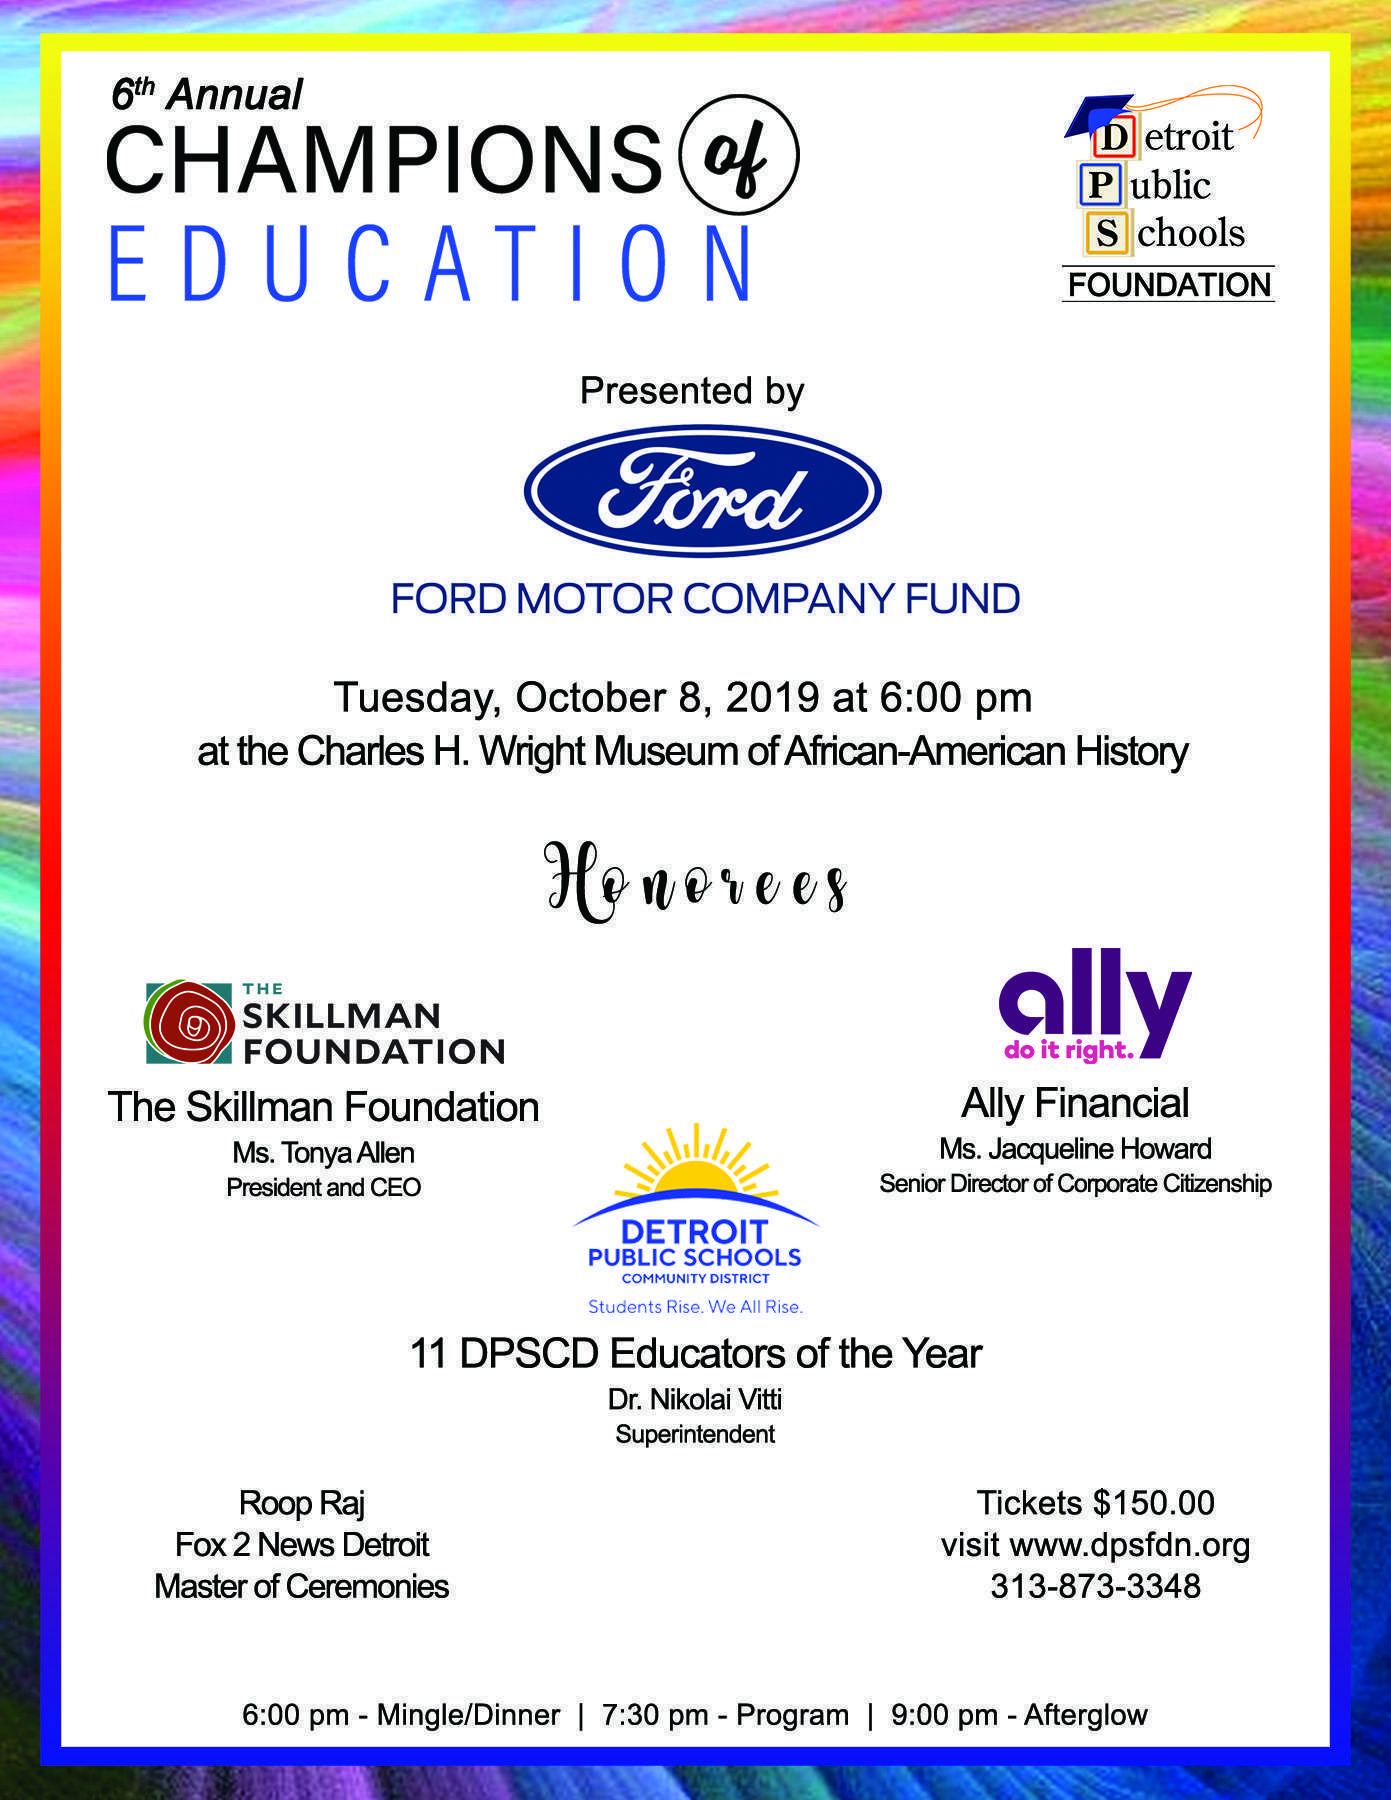 6th Annual Champions of Education